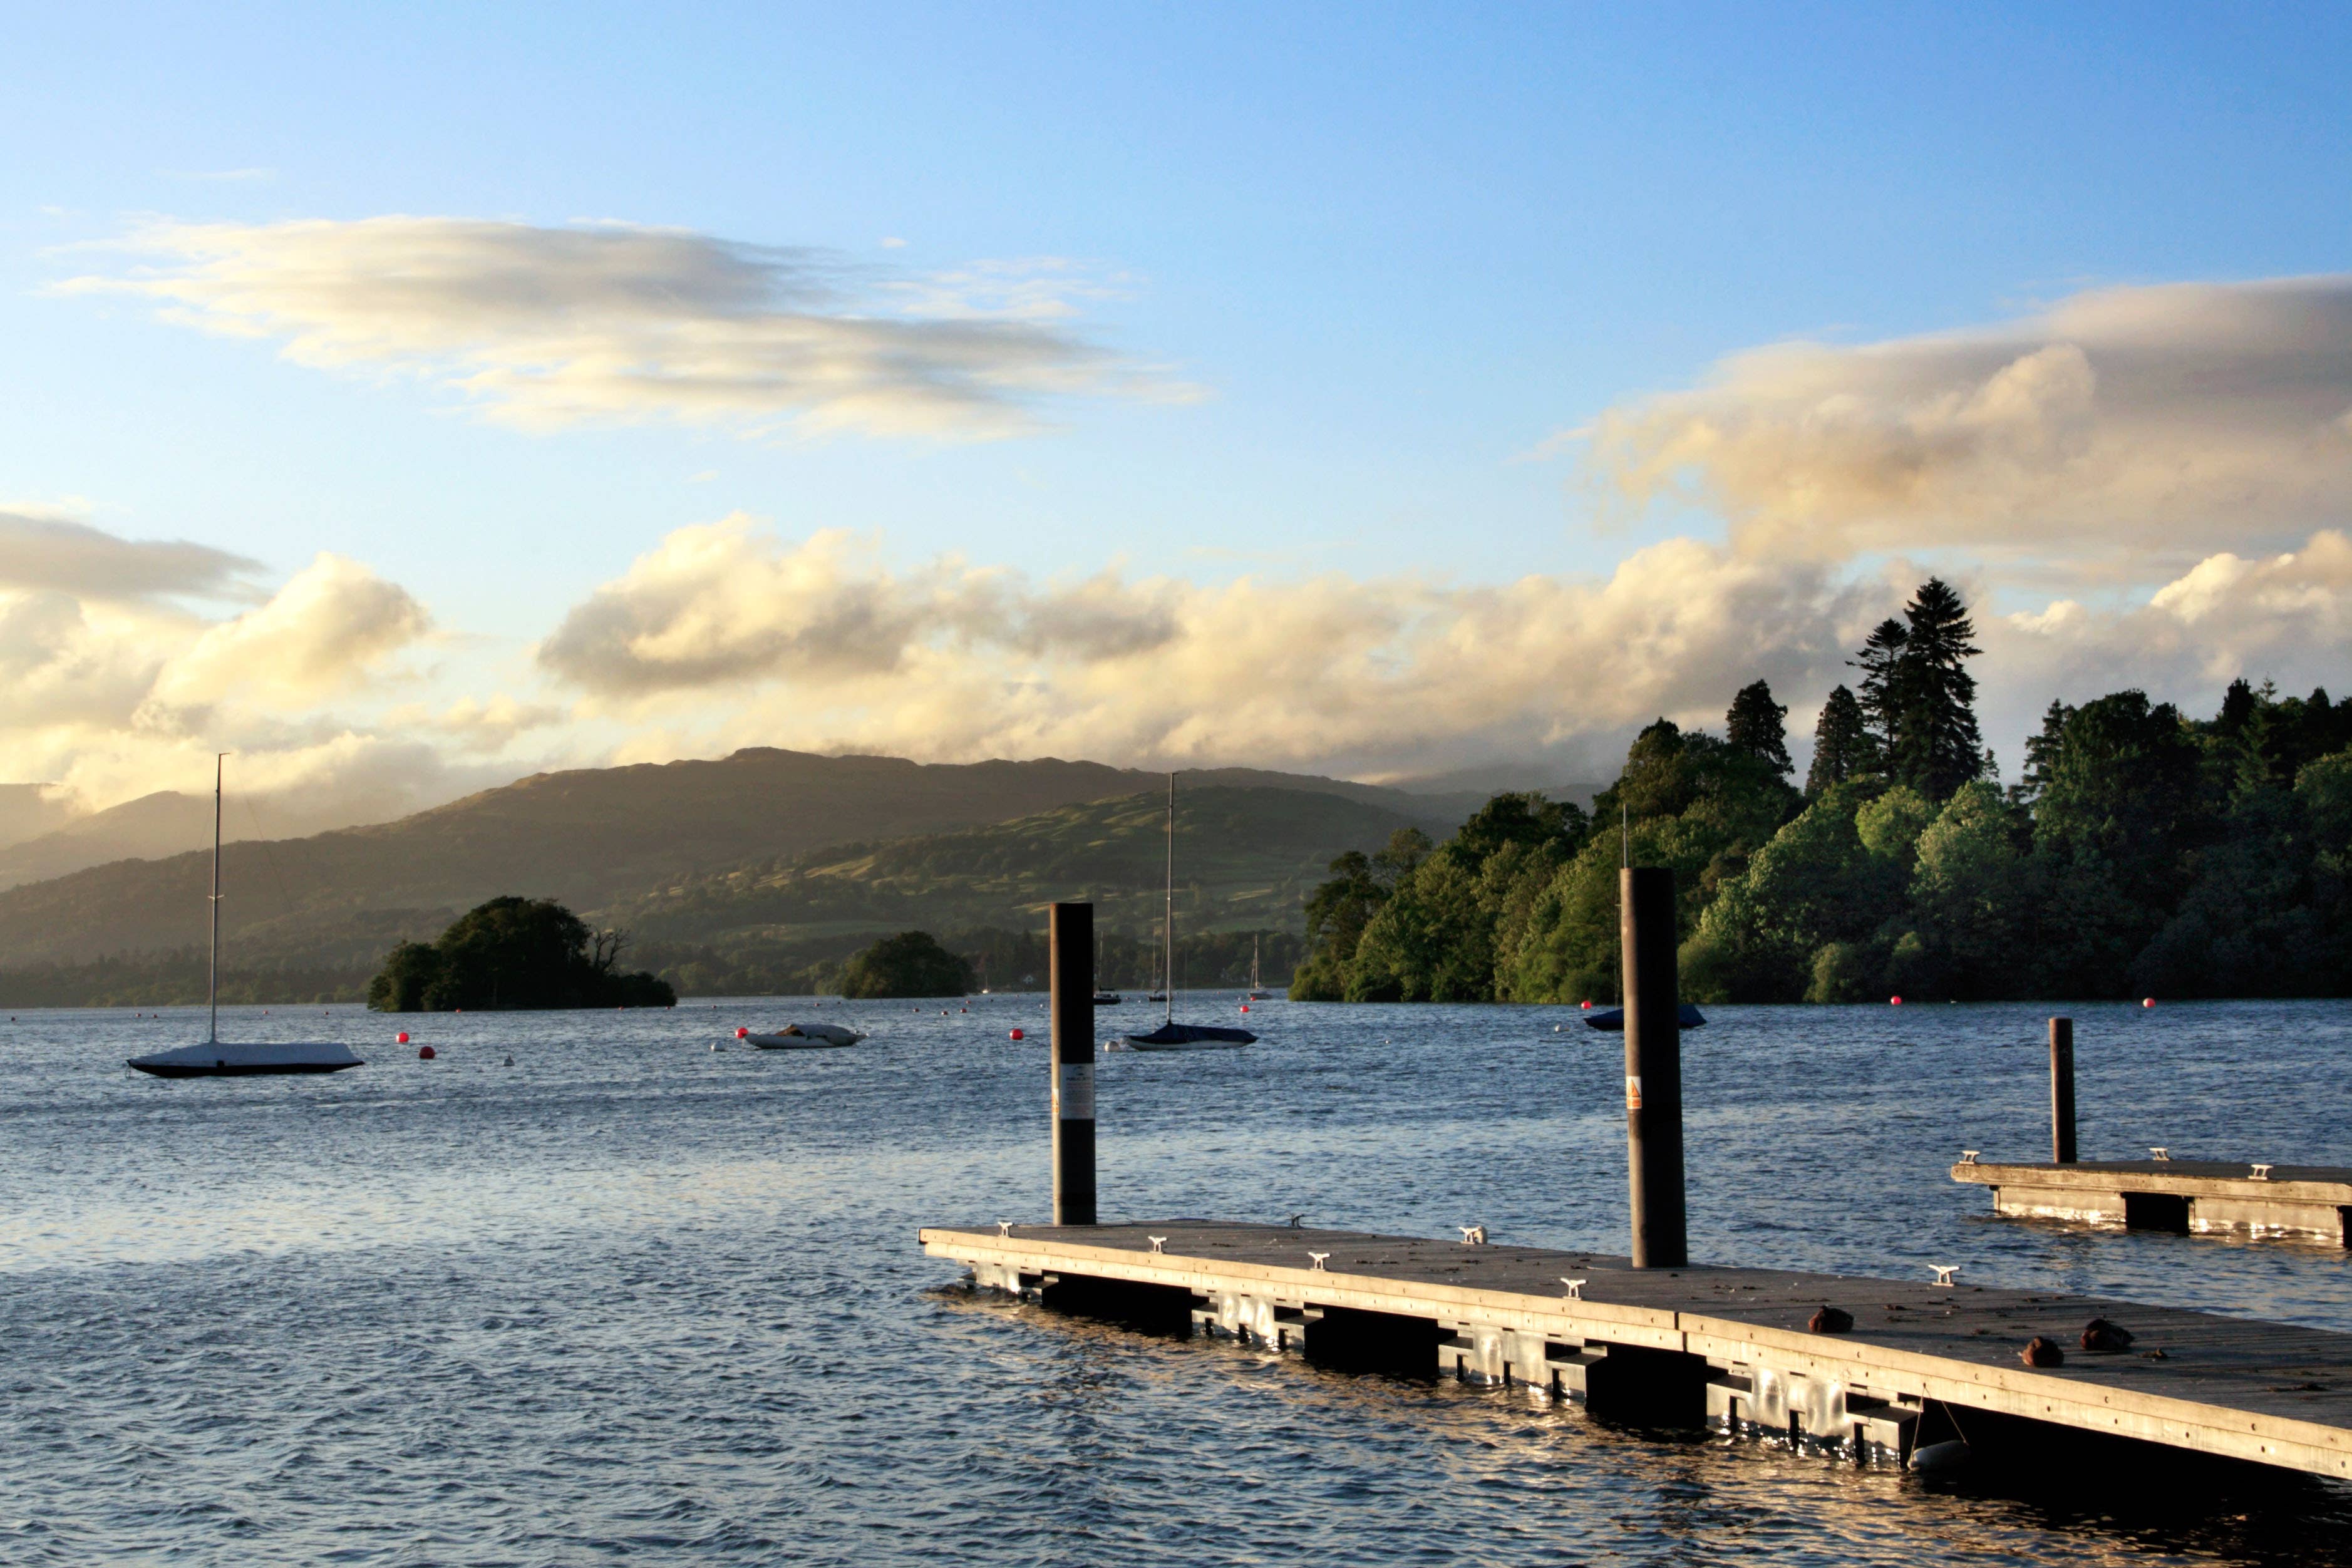 Lake Windermere at Bowness in the Lake District national park, Cumbria